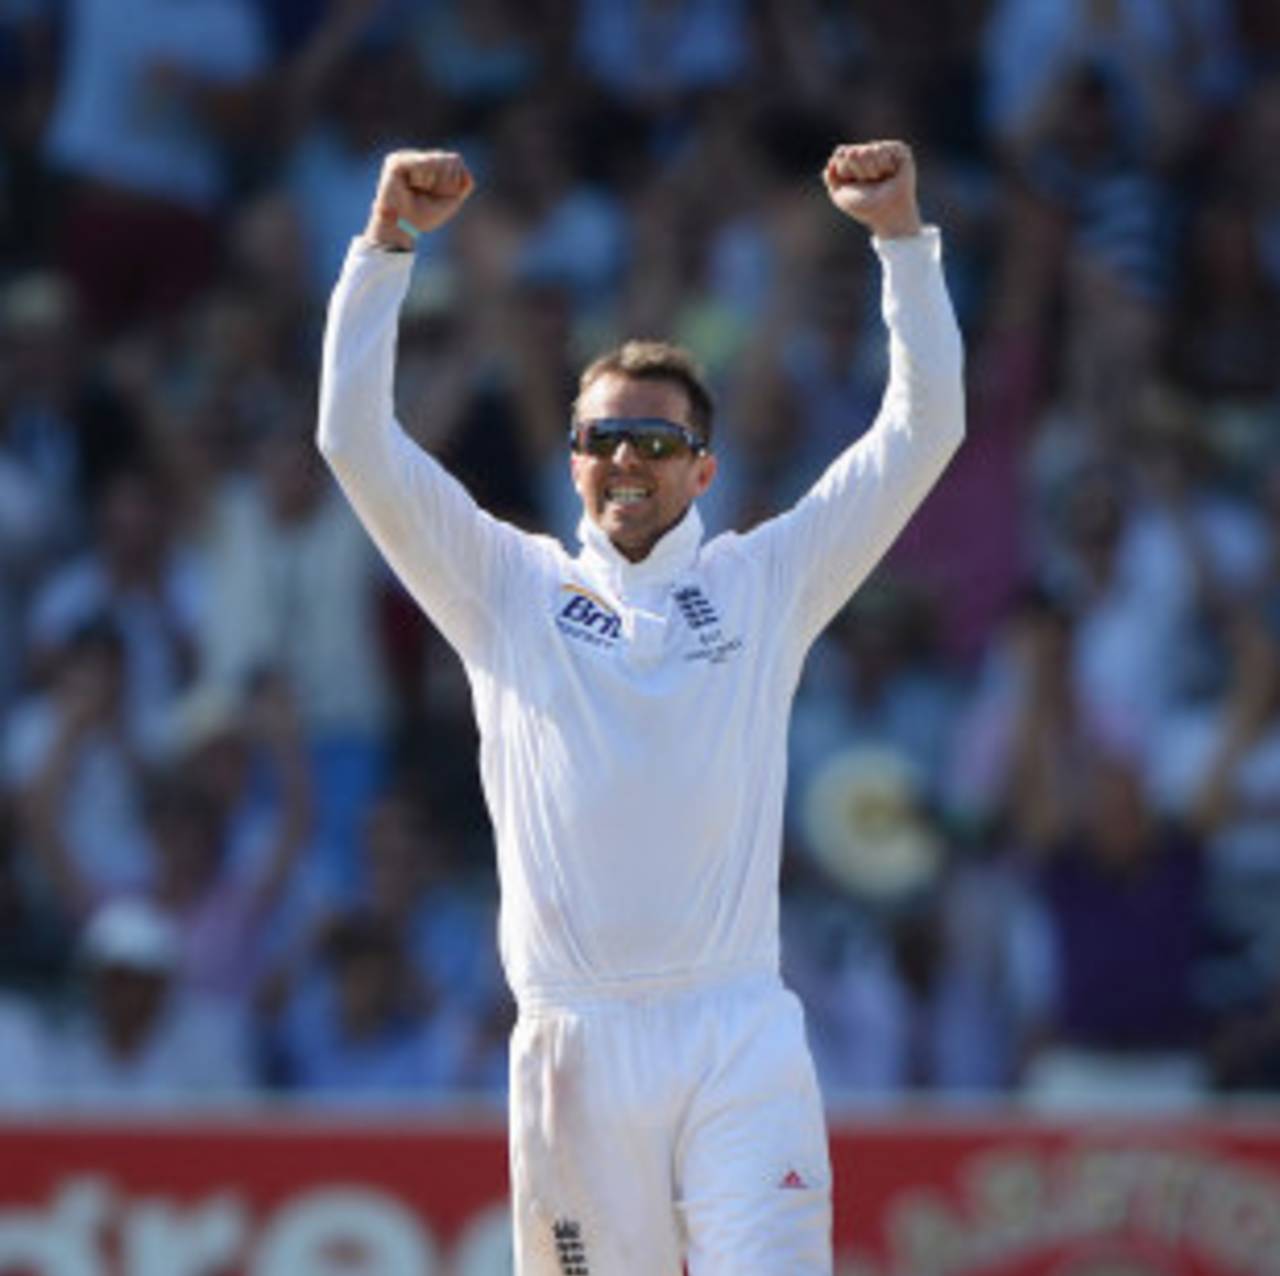 Graeme Swann enjoyed his day, England v Australia, 2nd Investec Ashes Test, Lord's, 2nd day, July 19, 2013